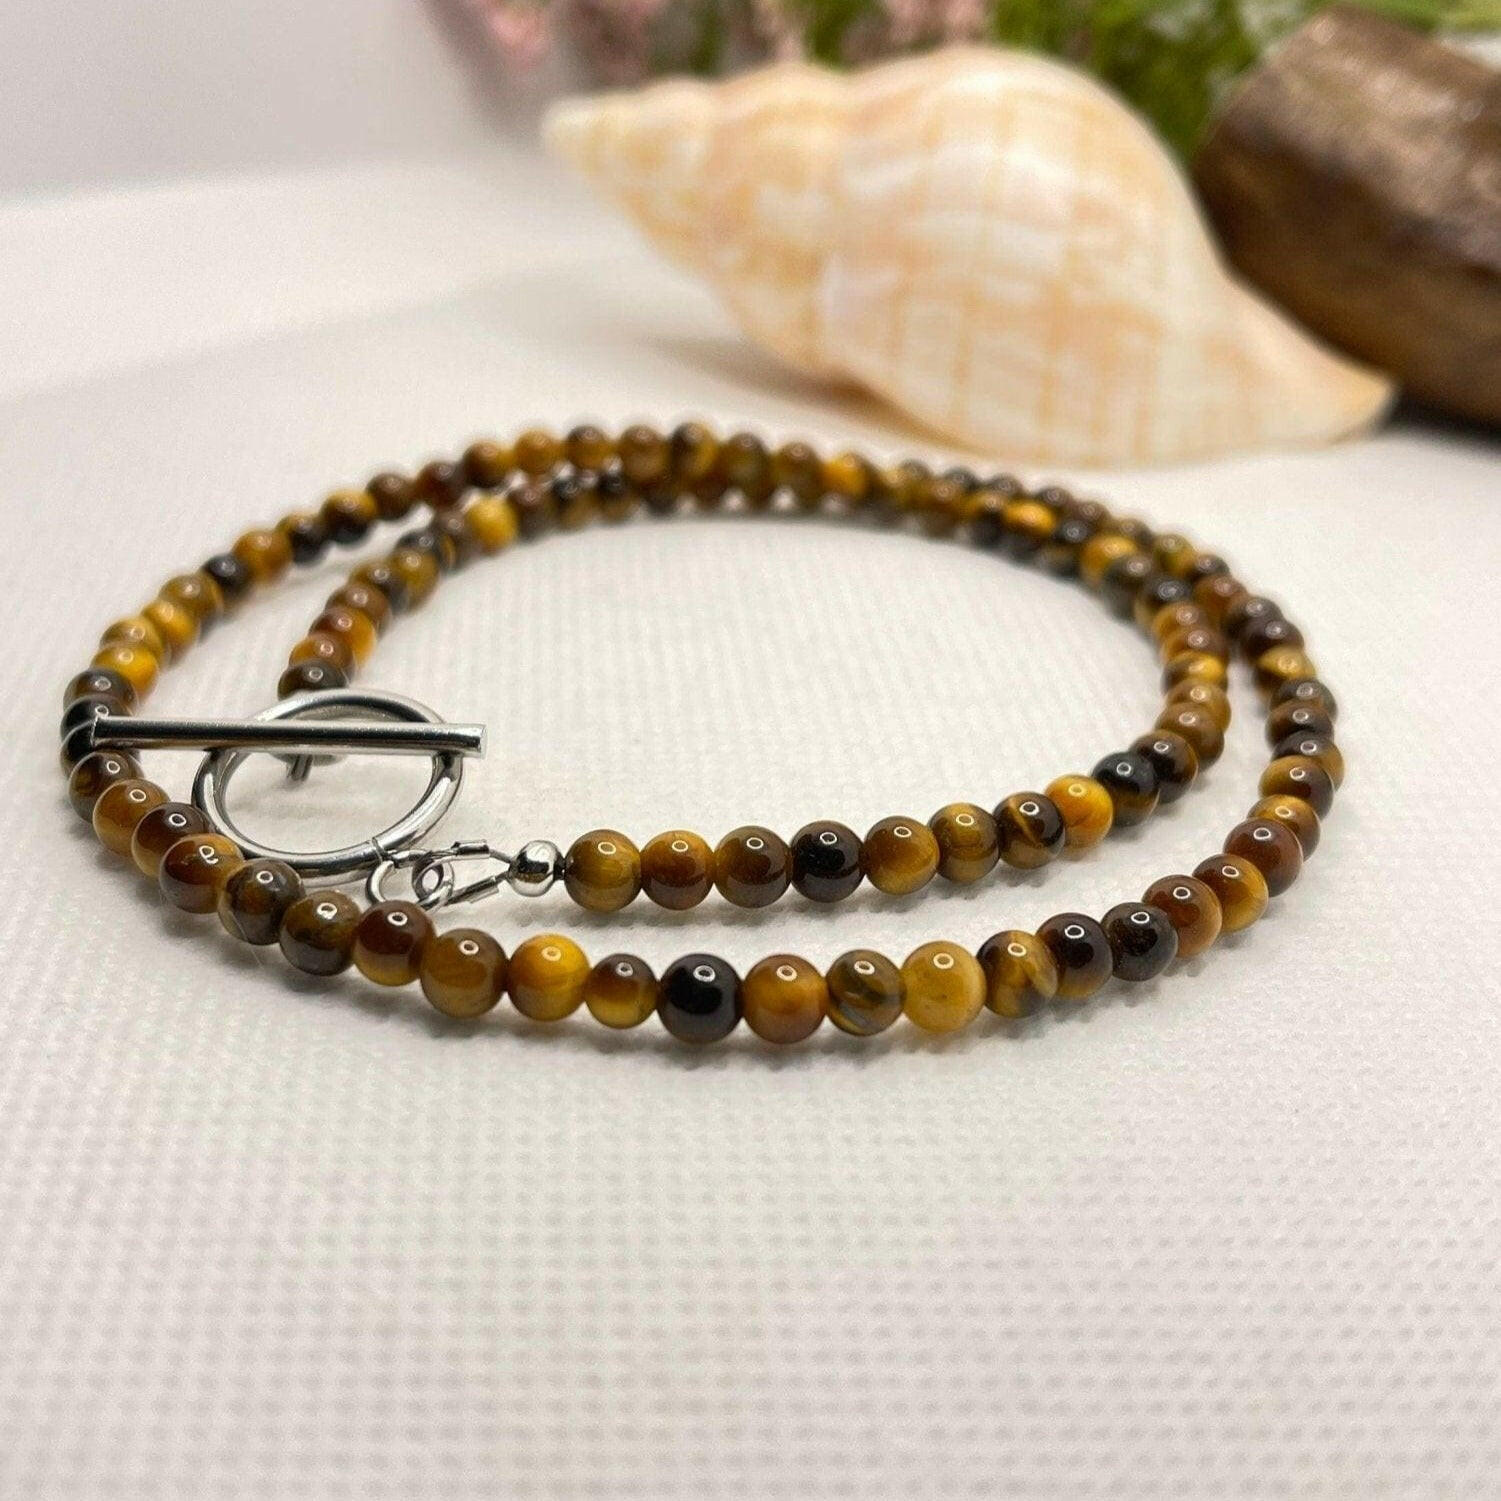 Bec Sue Jewelry Shop Necklaces 19 / yellow / Tiger Eye Tiger Eye Necklace, Tiger Eye Healing Necklace Tags 308